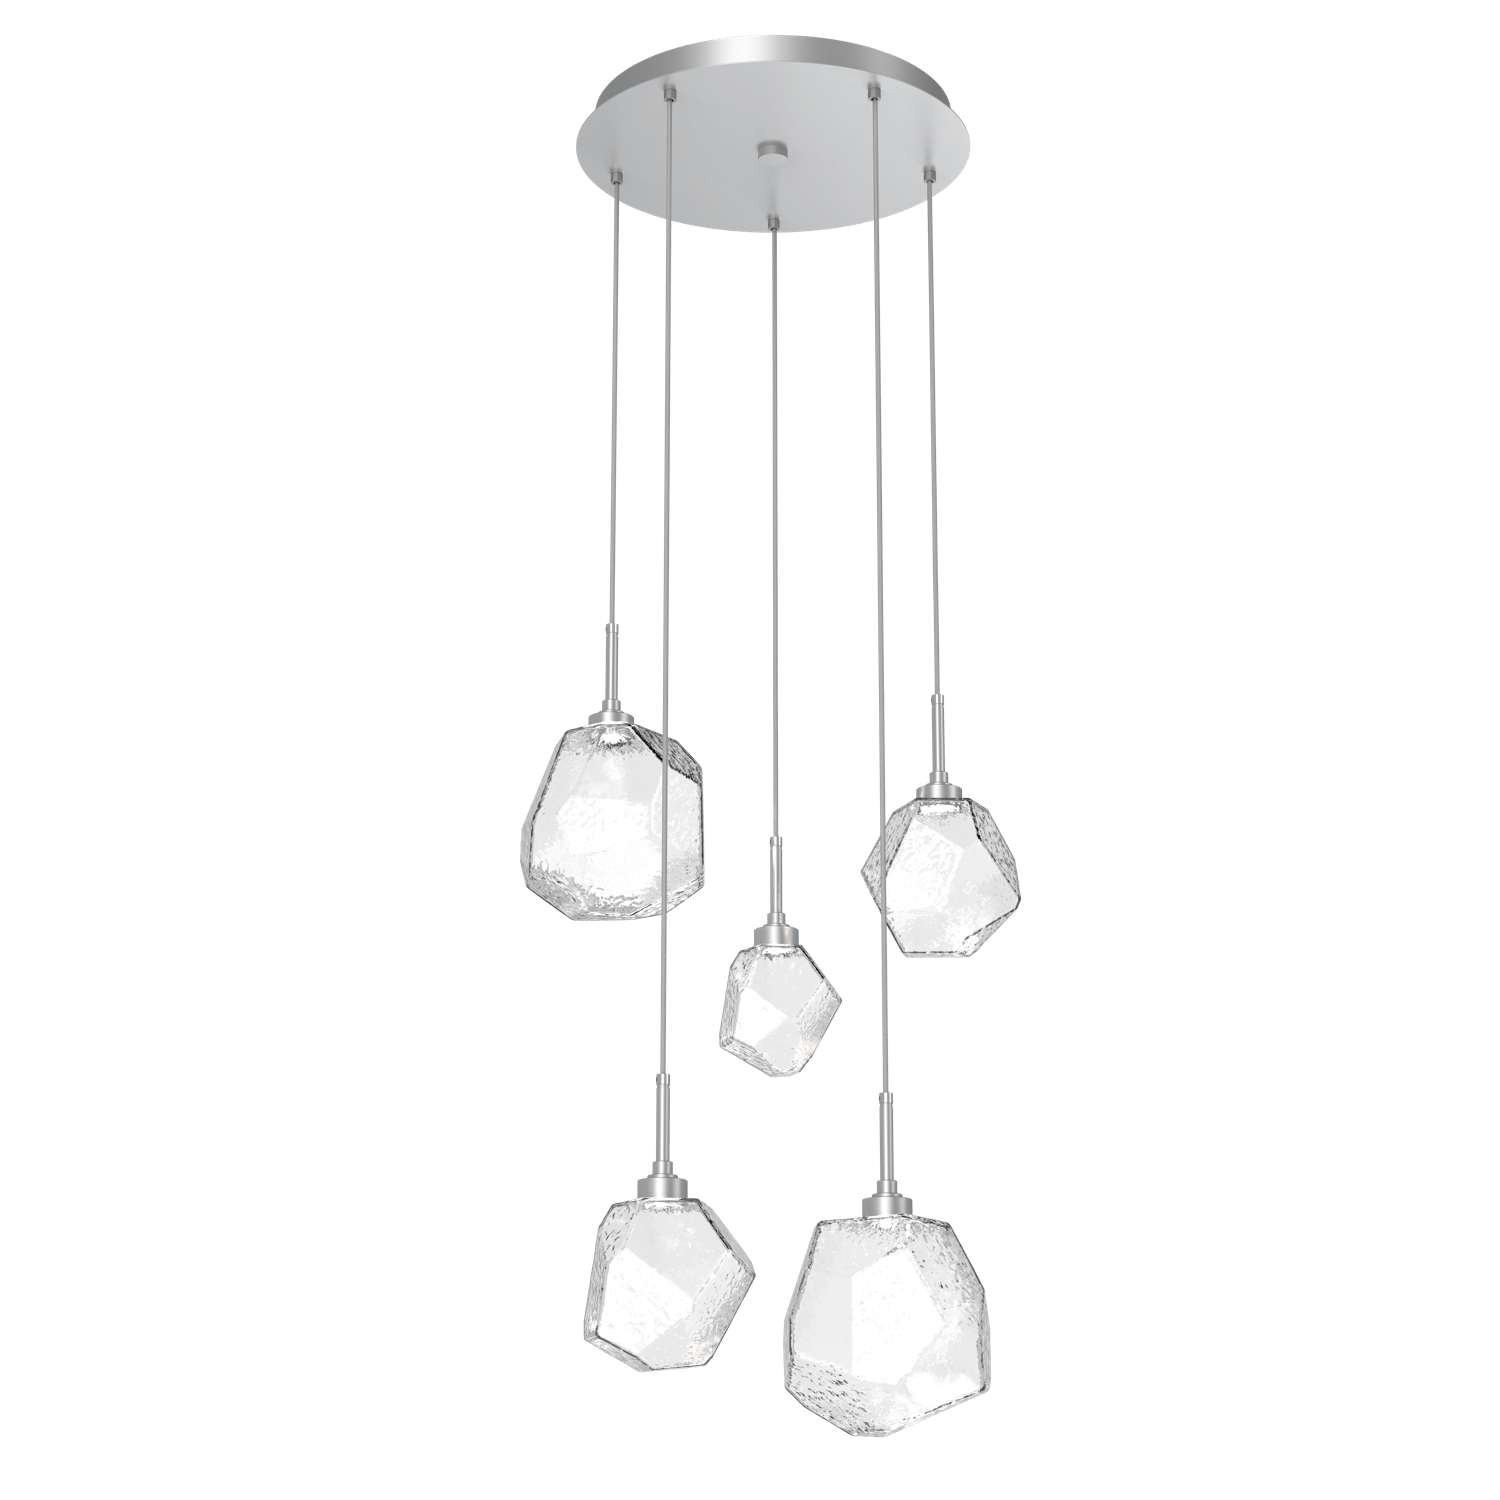 CHB0039-05-CS-C-Hammerton-Studio-Gem-5-light-round-pendant-chandelier-with-classic-silver-finish-and-clear-blown-glass-shades-and-LED-lamping